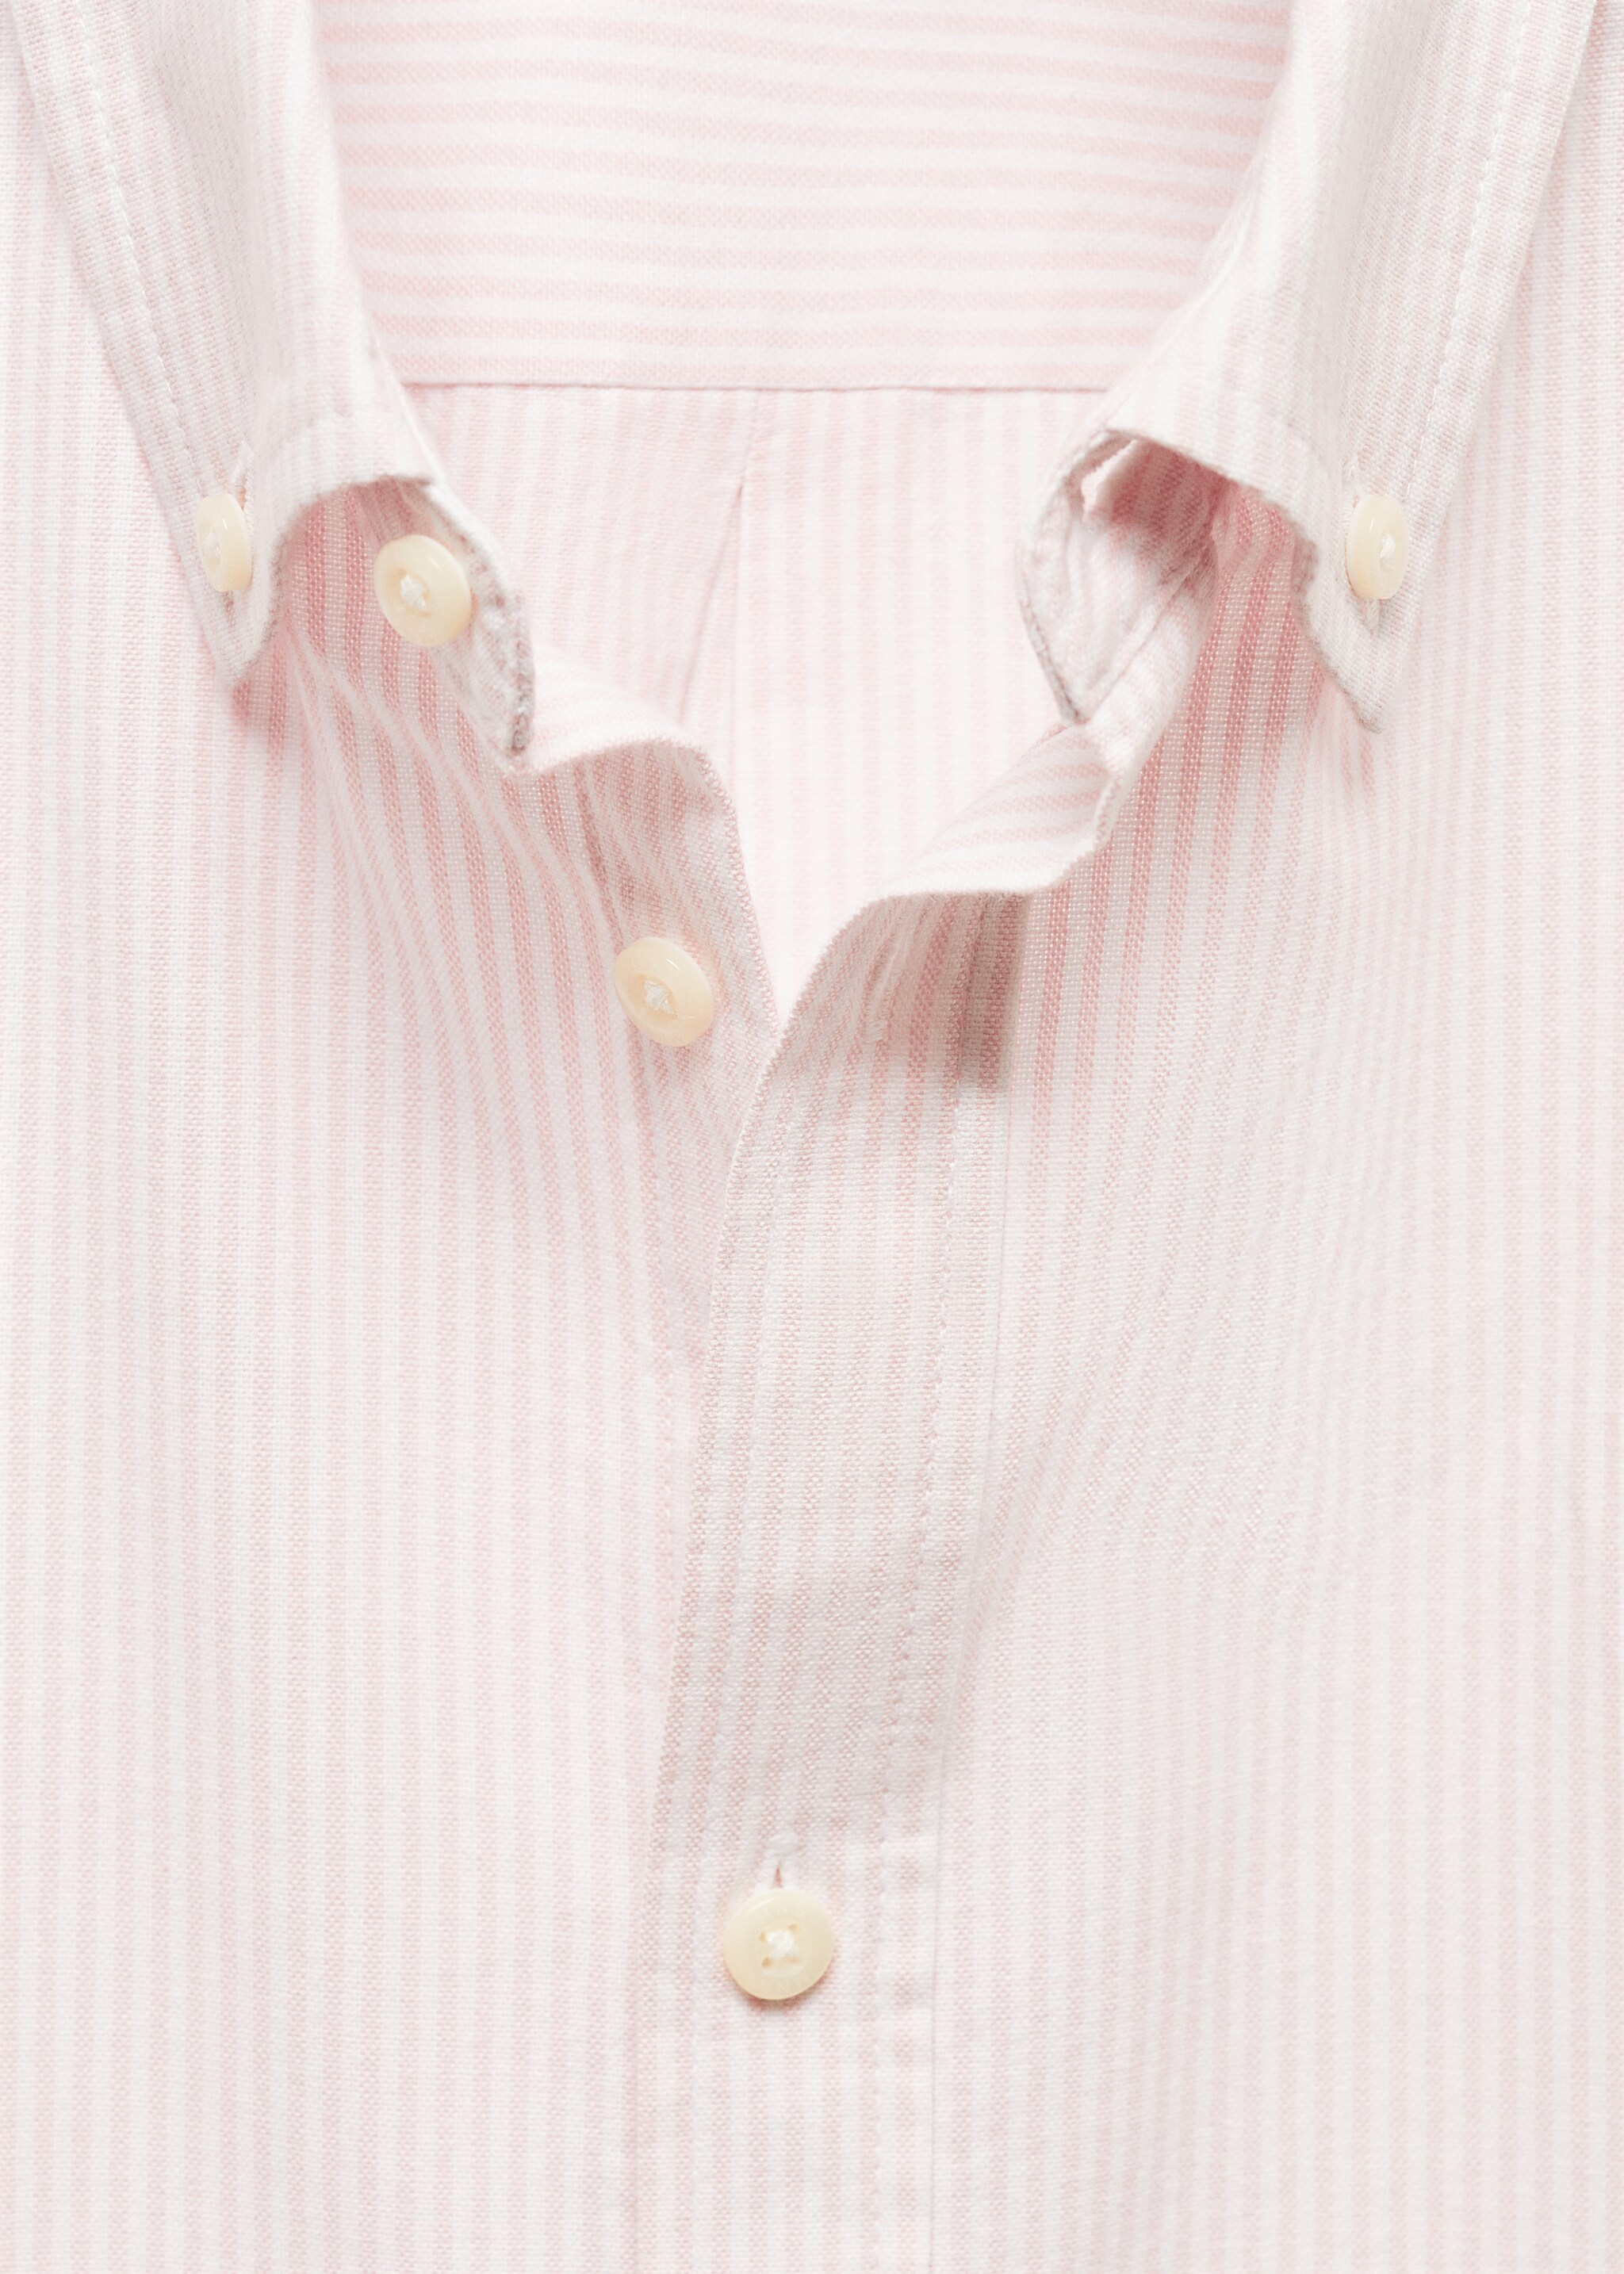 Unisex striped Oxford shirt - Details of the article 8